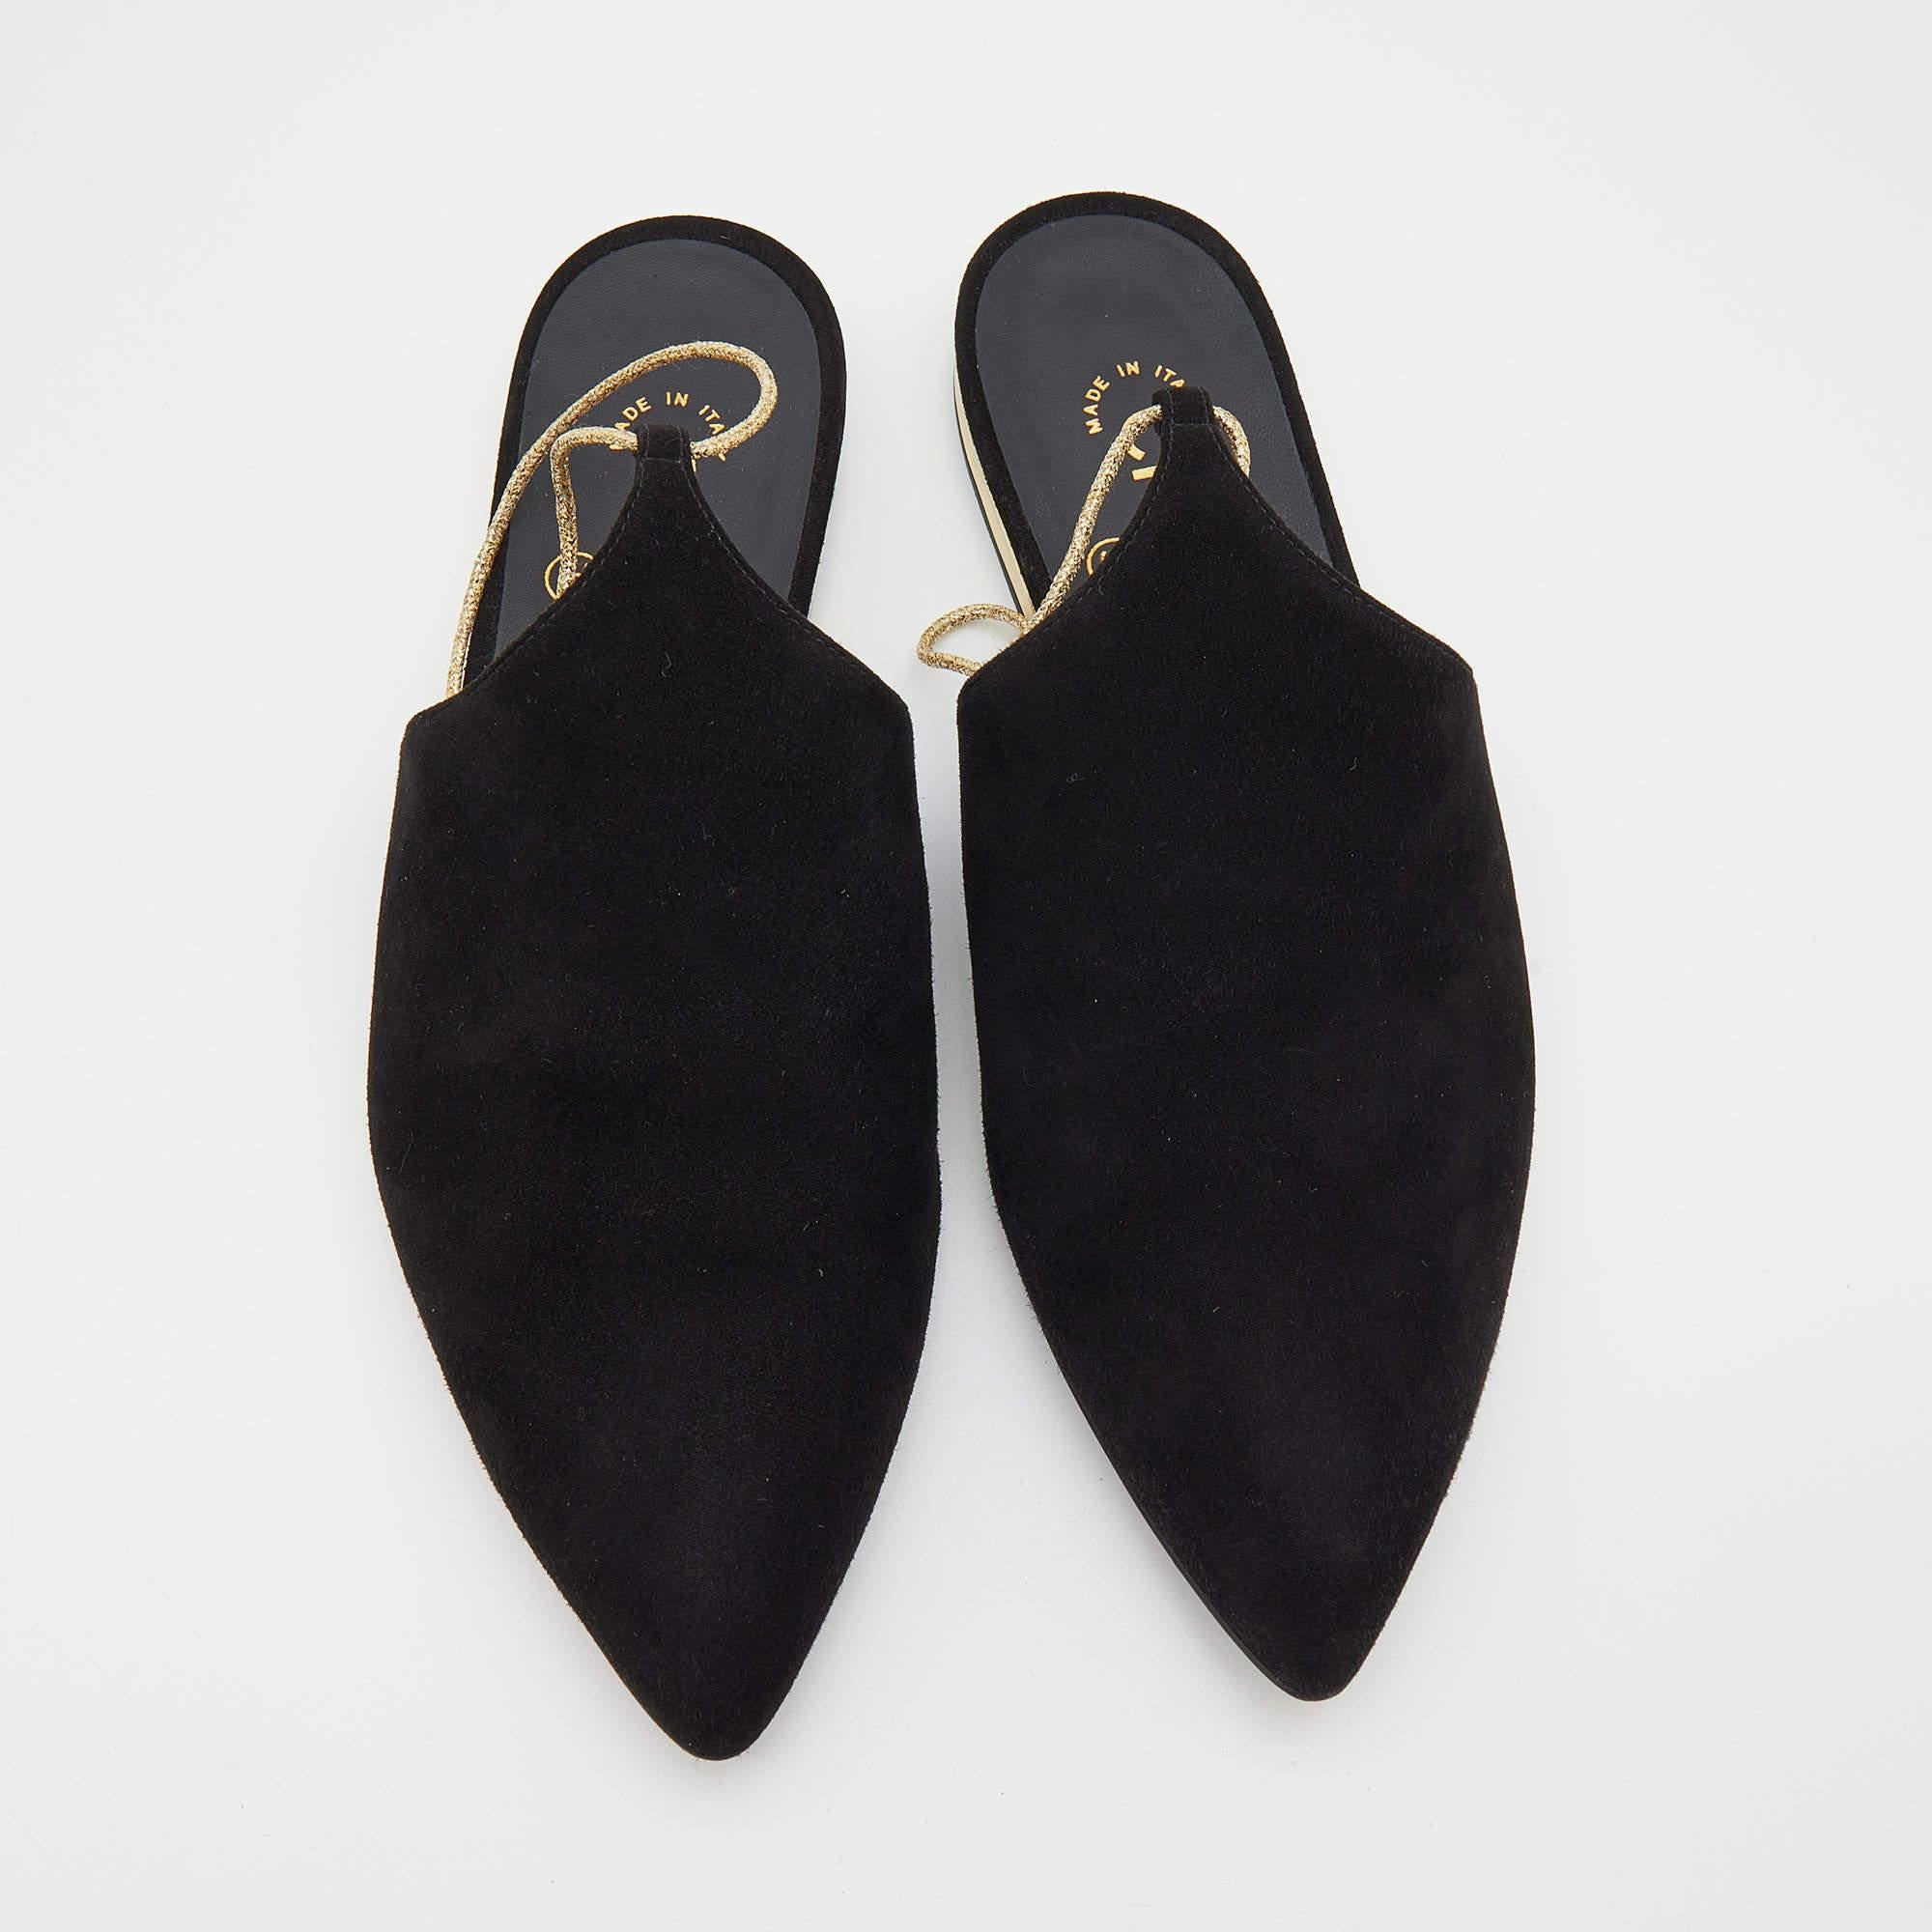 From their Cruise 2015 Collection, these Chanel mules carry a black suede exterior, pointed toes, and metallic wraps at the ankle. Complete with the signature CC on the rear, this fabulous pair will make you fall in love with shoes all over